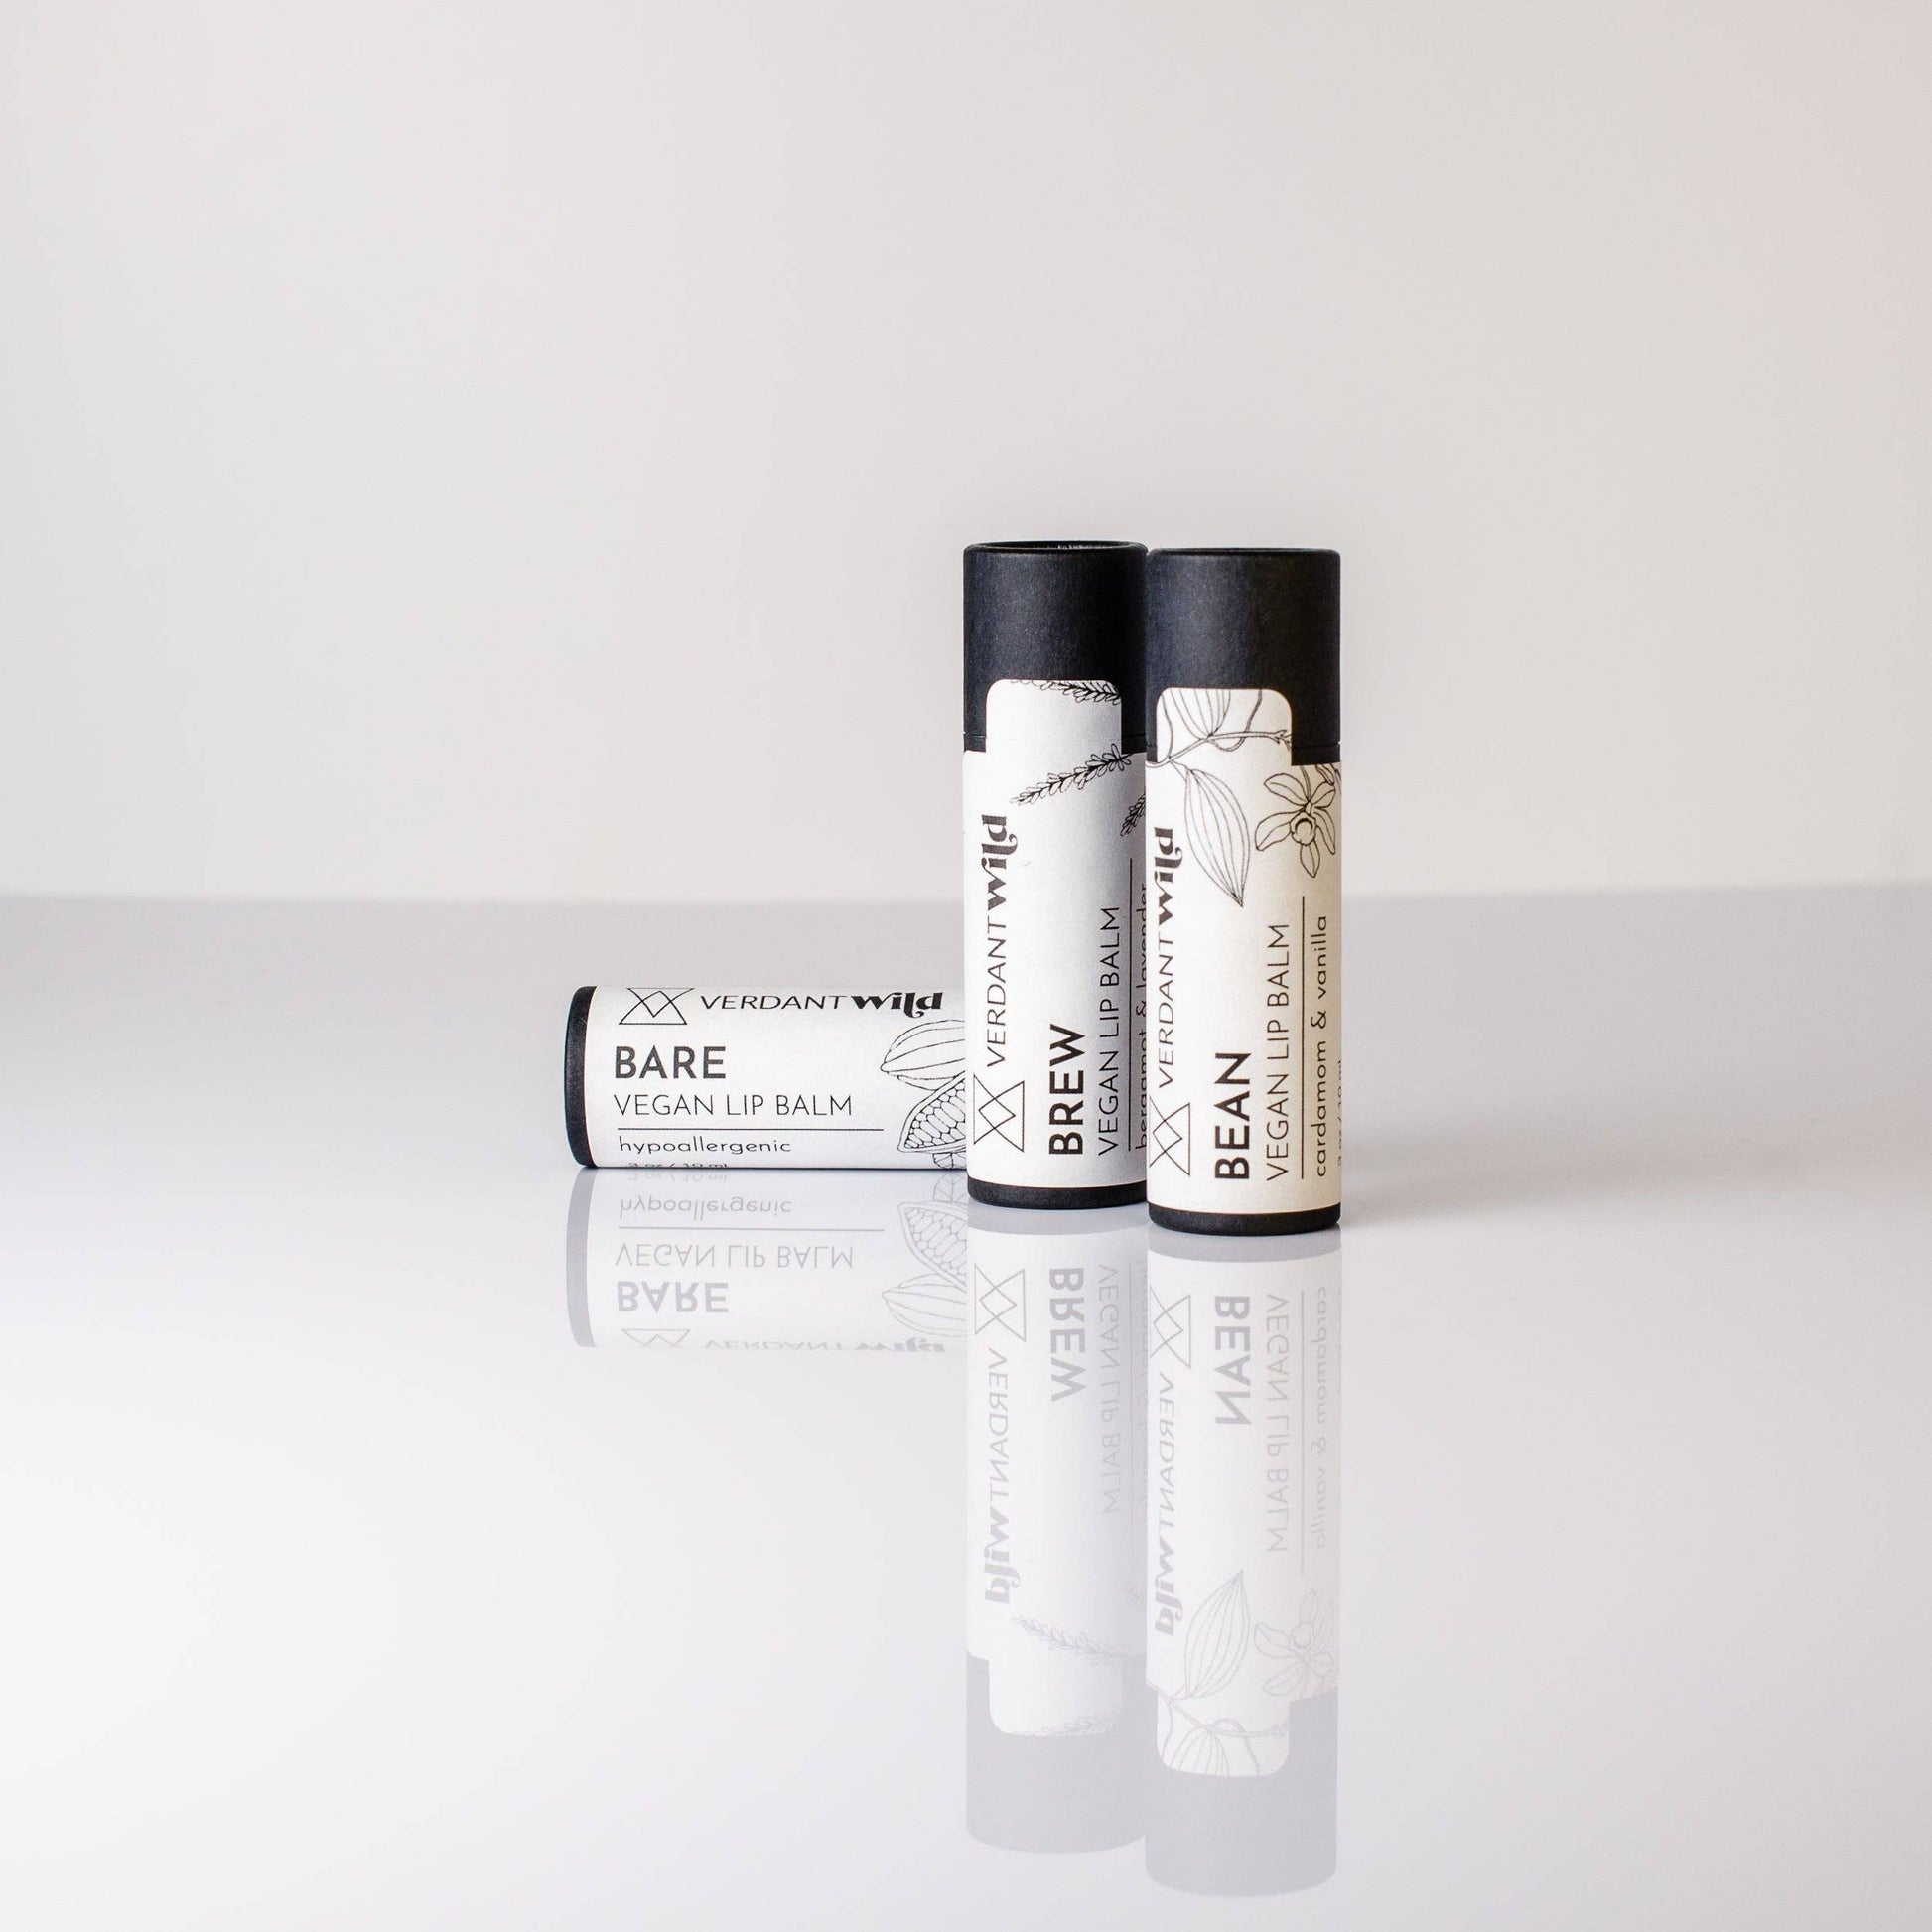 Three vegan lip balms in black biodegradable tubes with white labels.